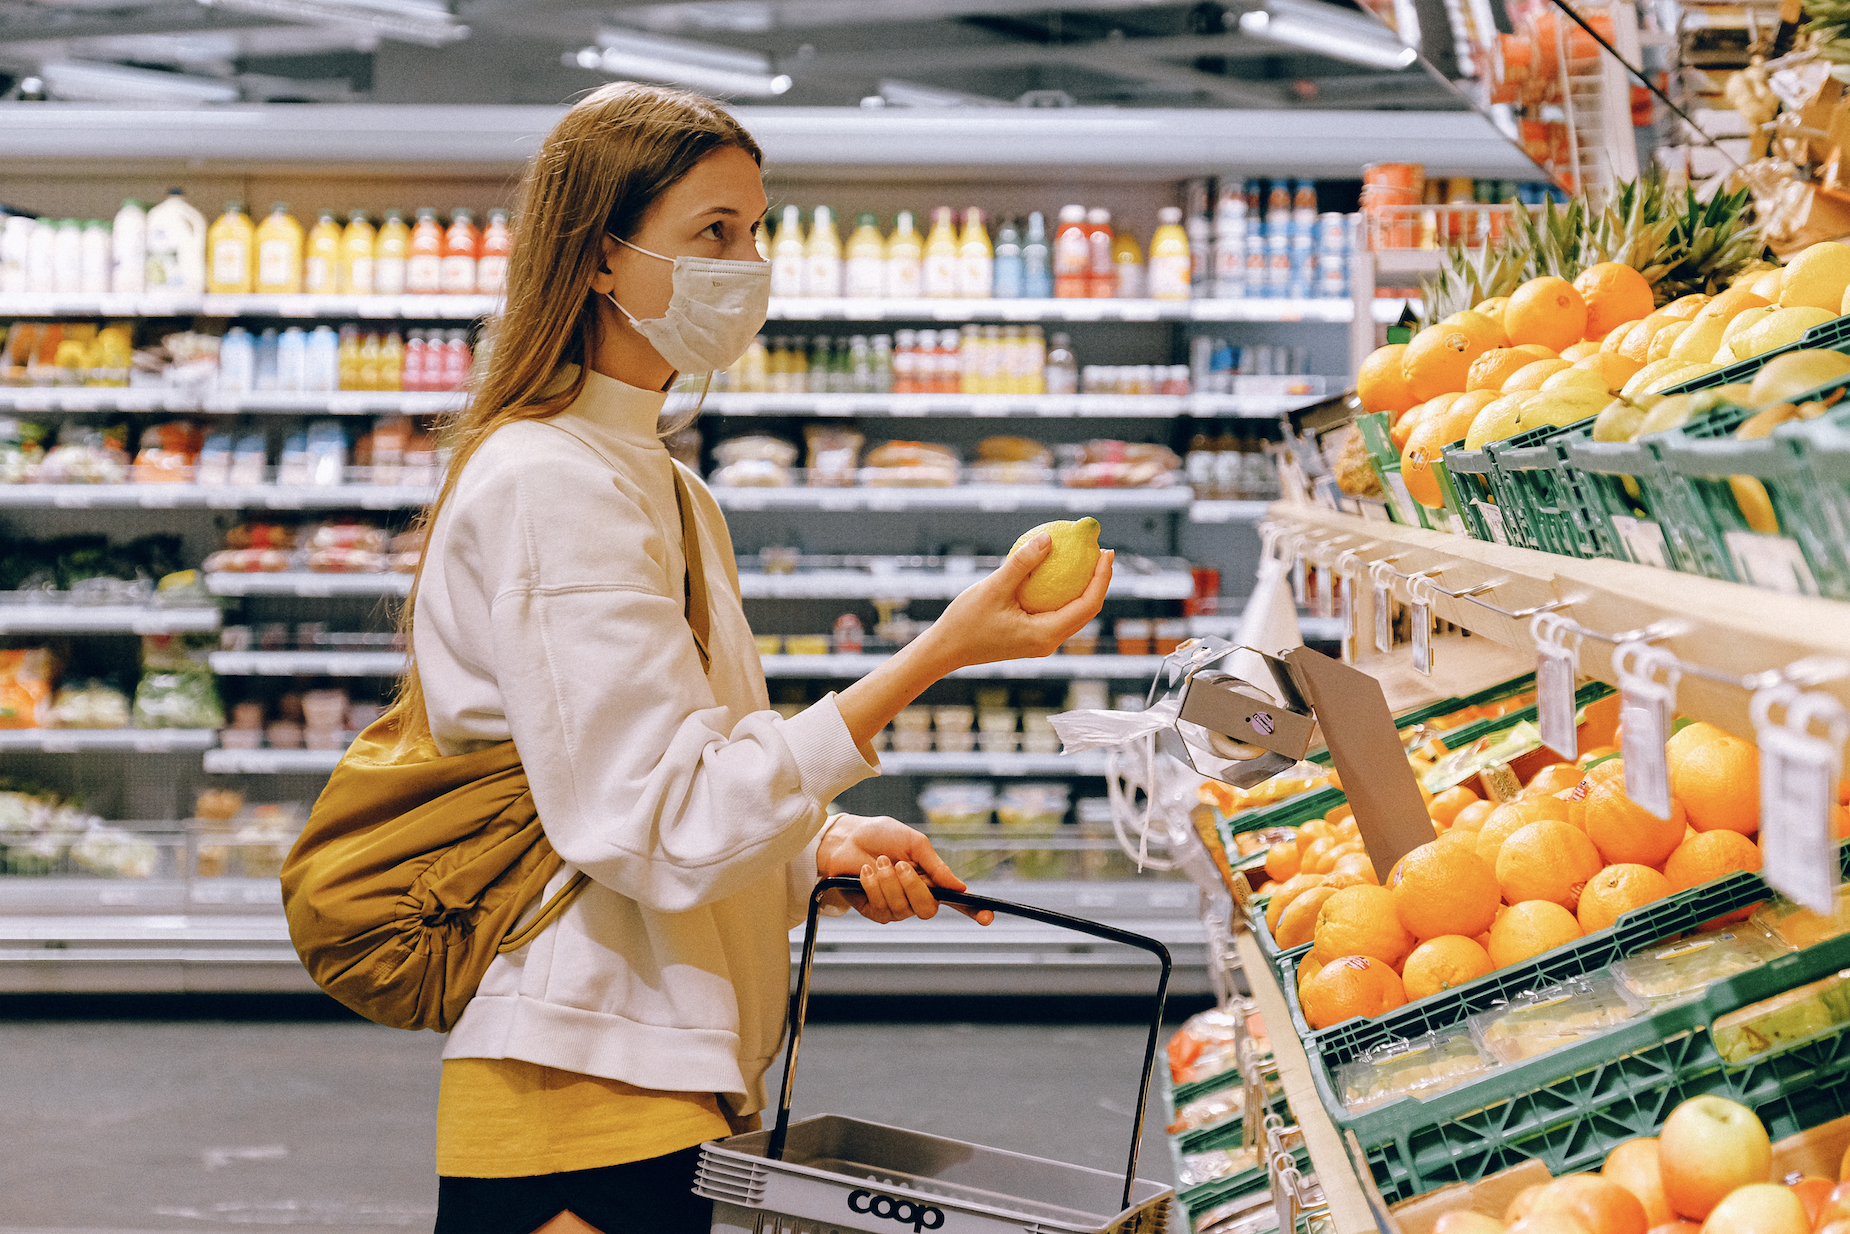 6 Insights on How Consumers Shop for New Products During COVID-19